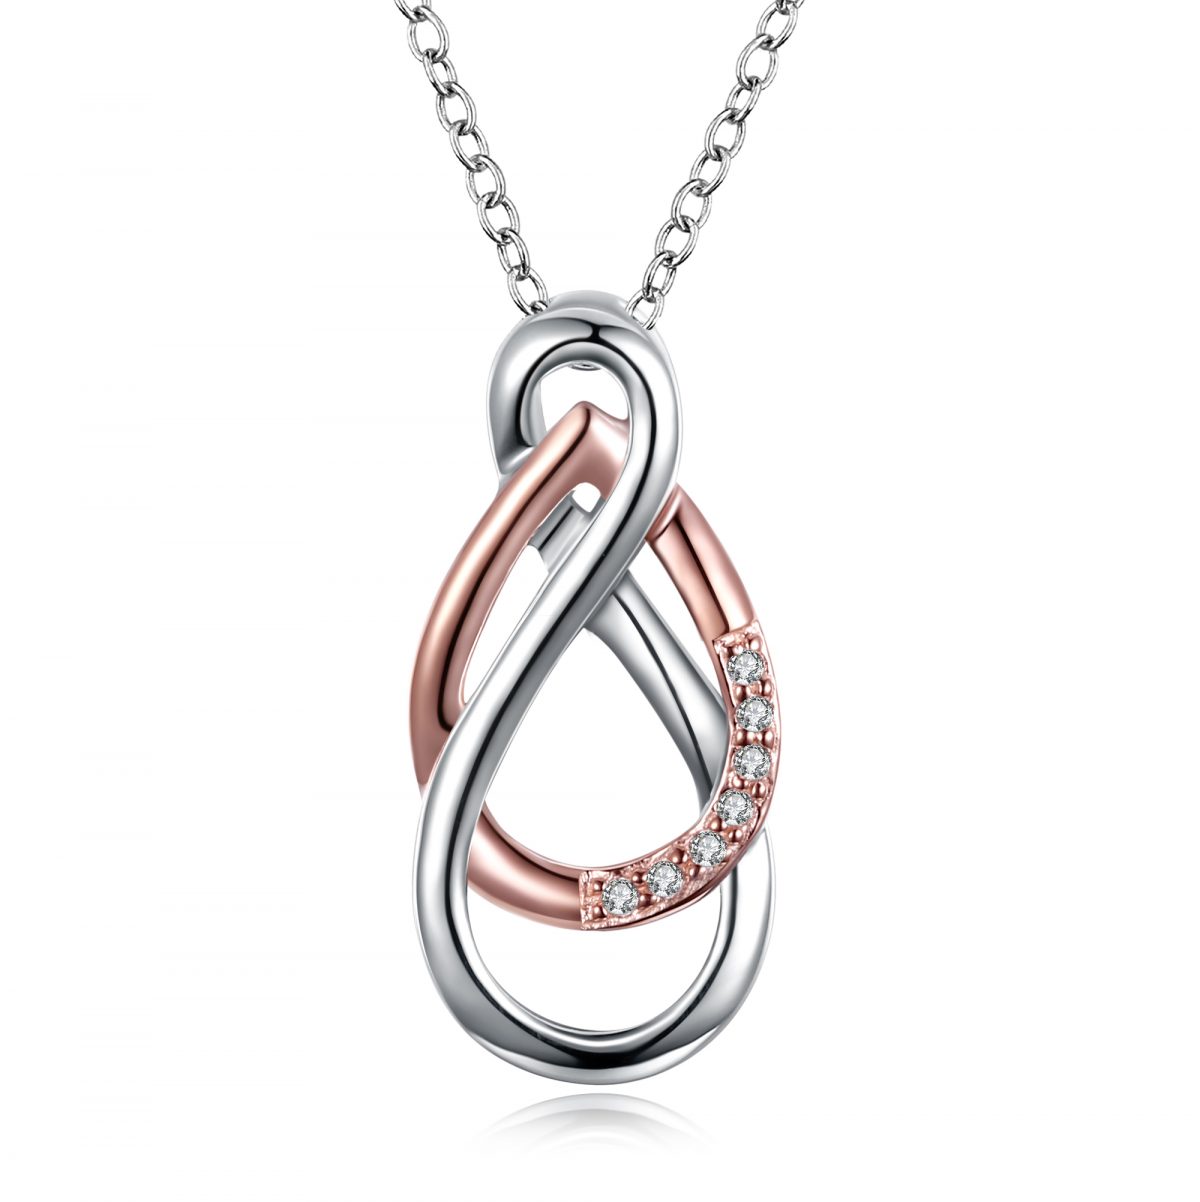 Two Tone Charming Lock Necklace - Silver & Rose Gold